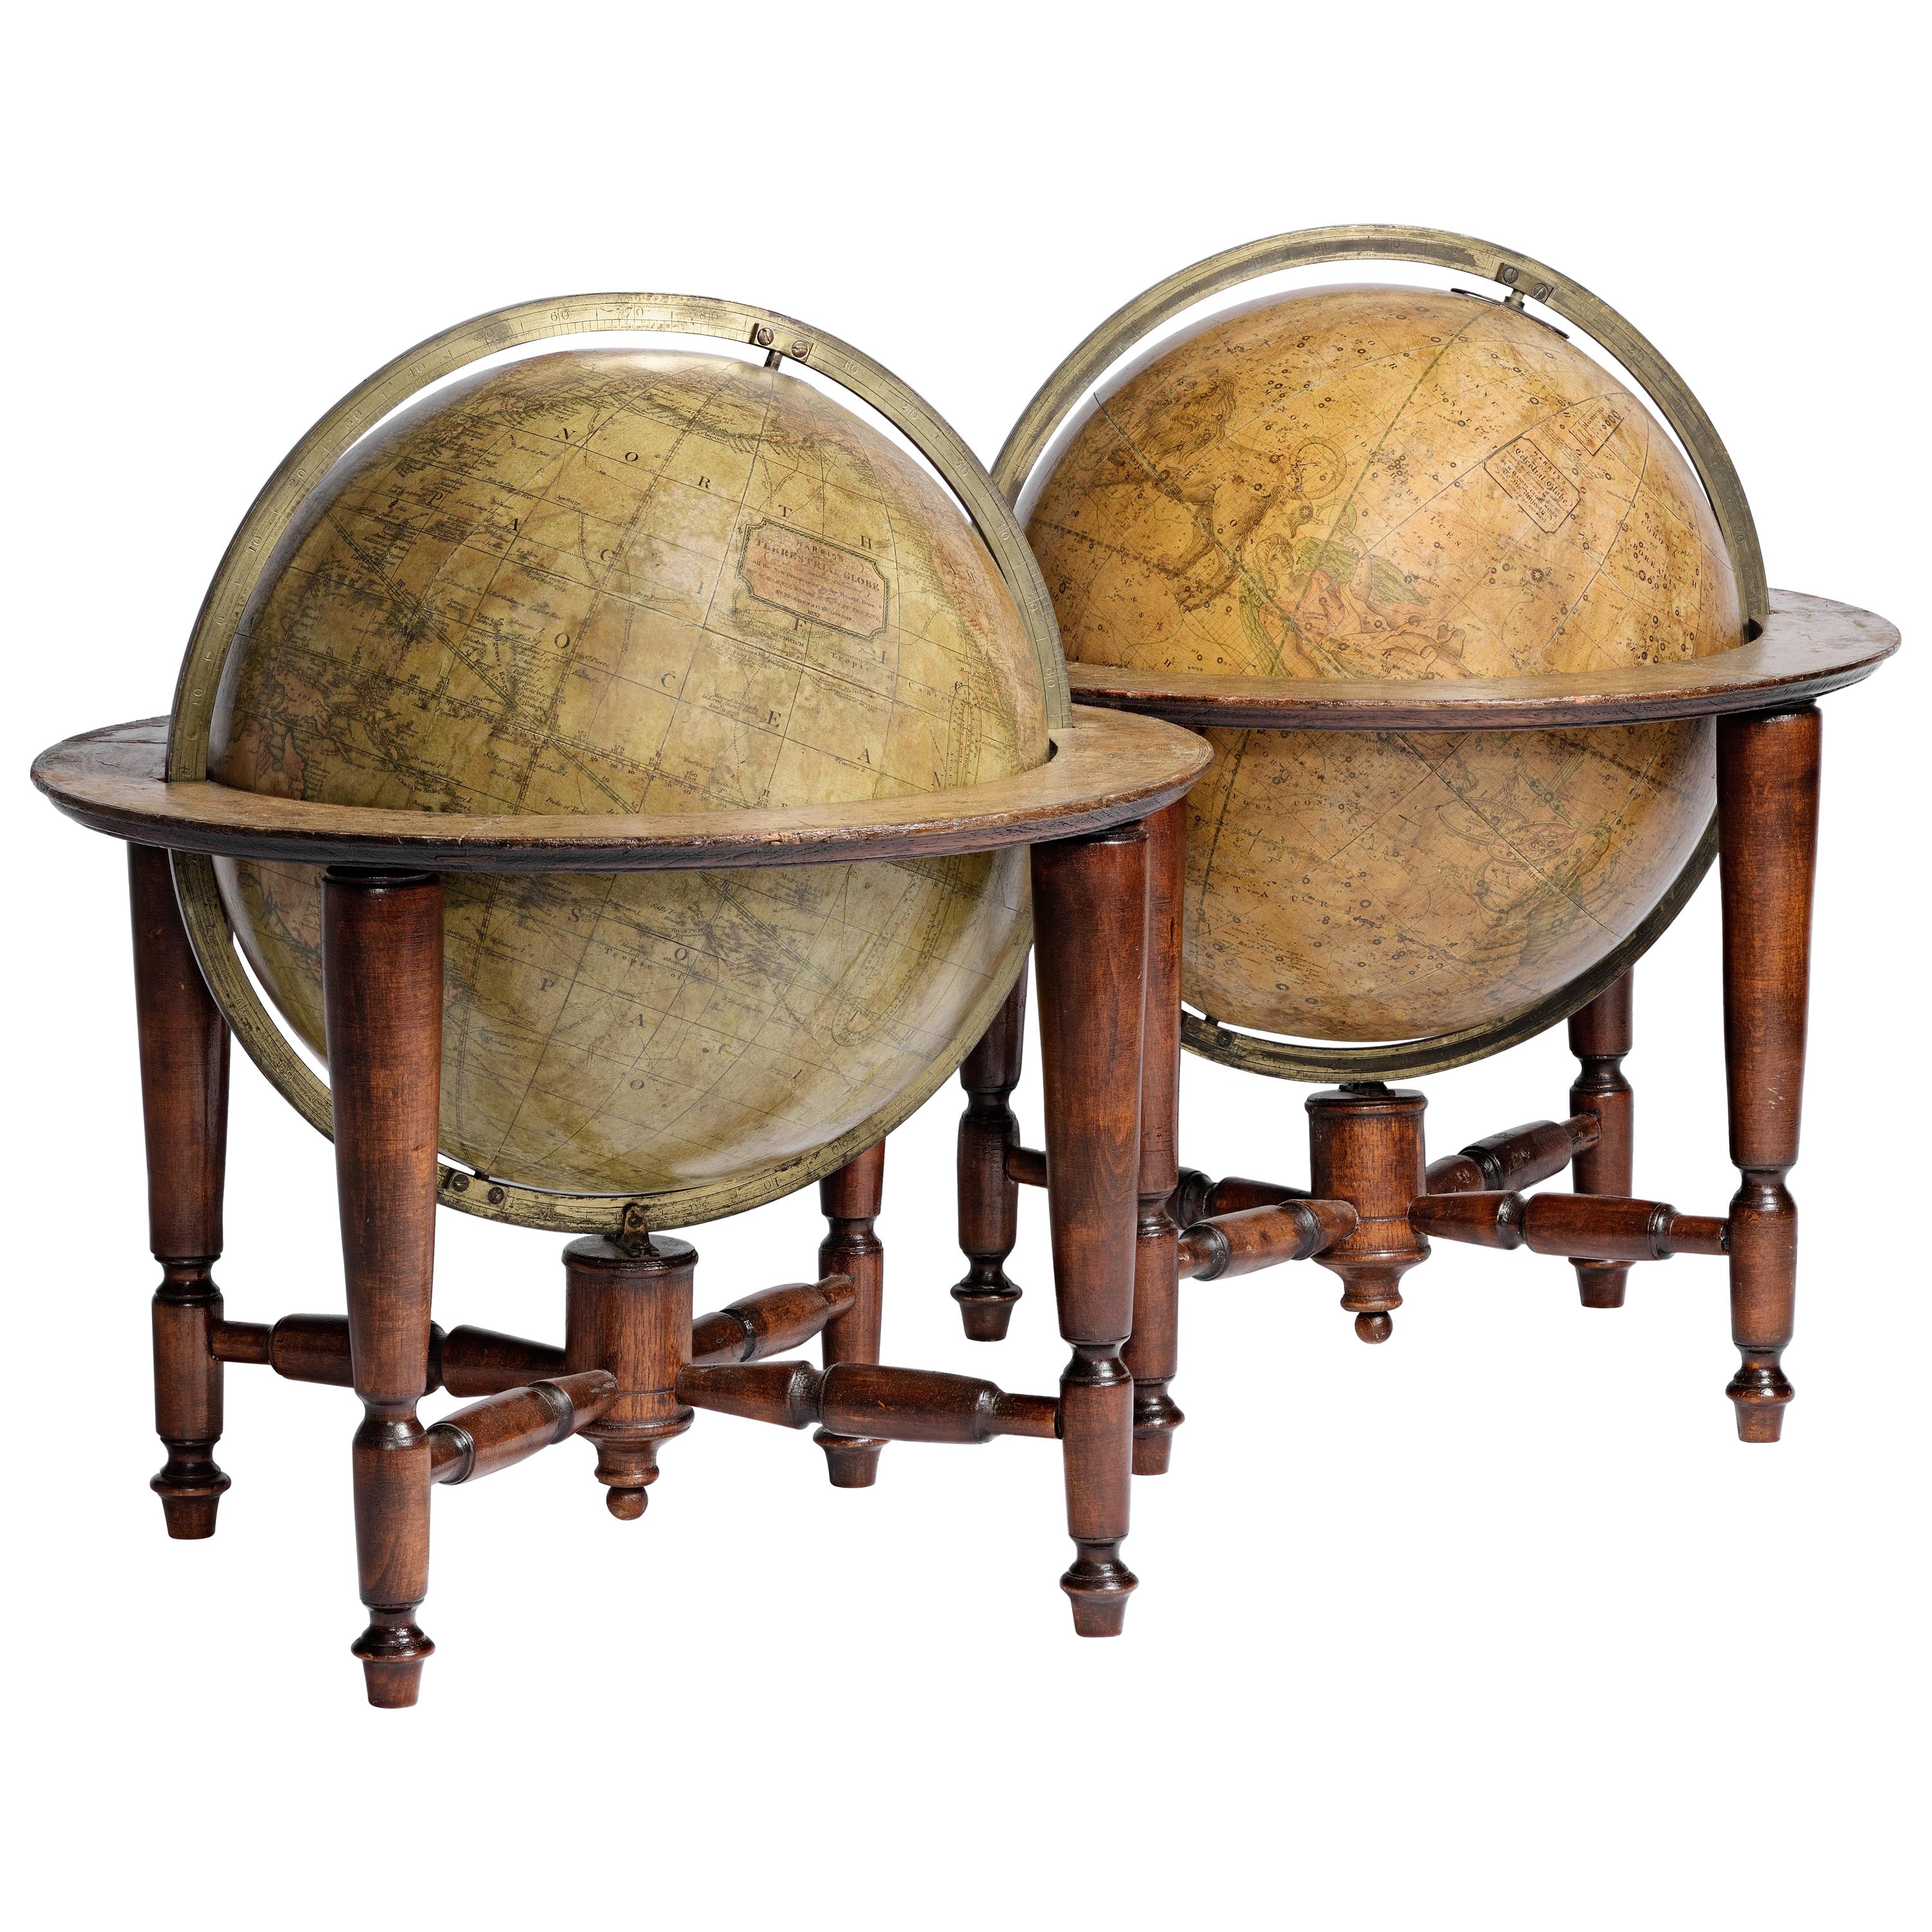 Pair of English 12-inch Globes by William Harris, London, 1832 and 1835 For Sale